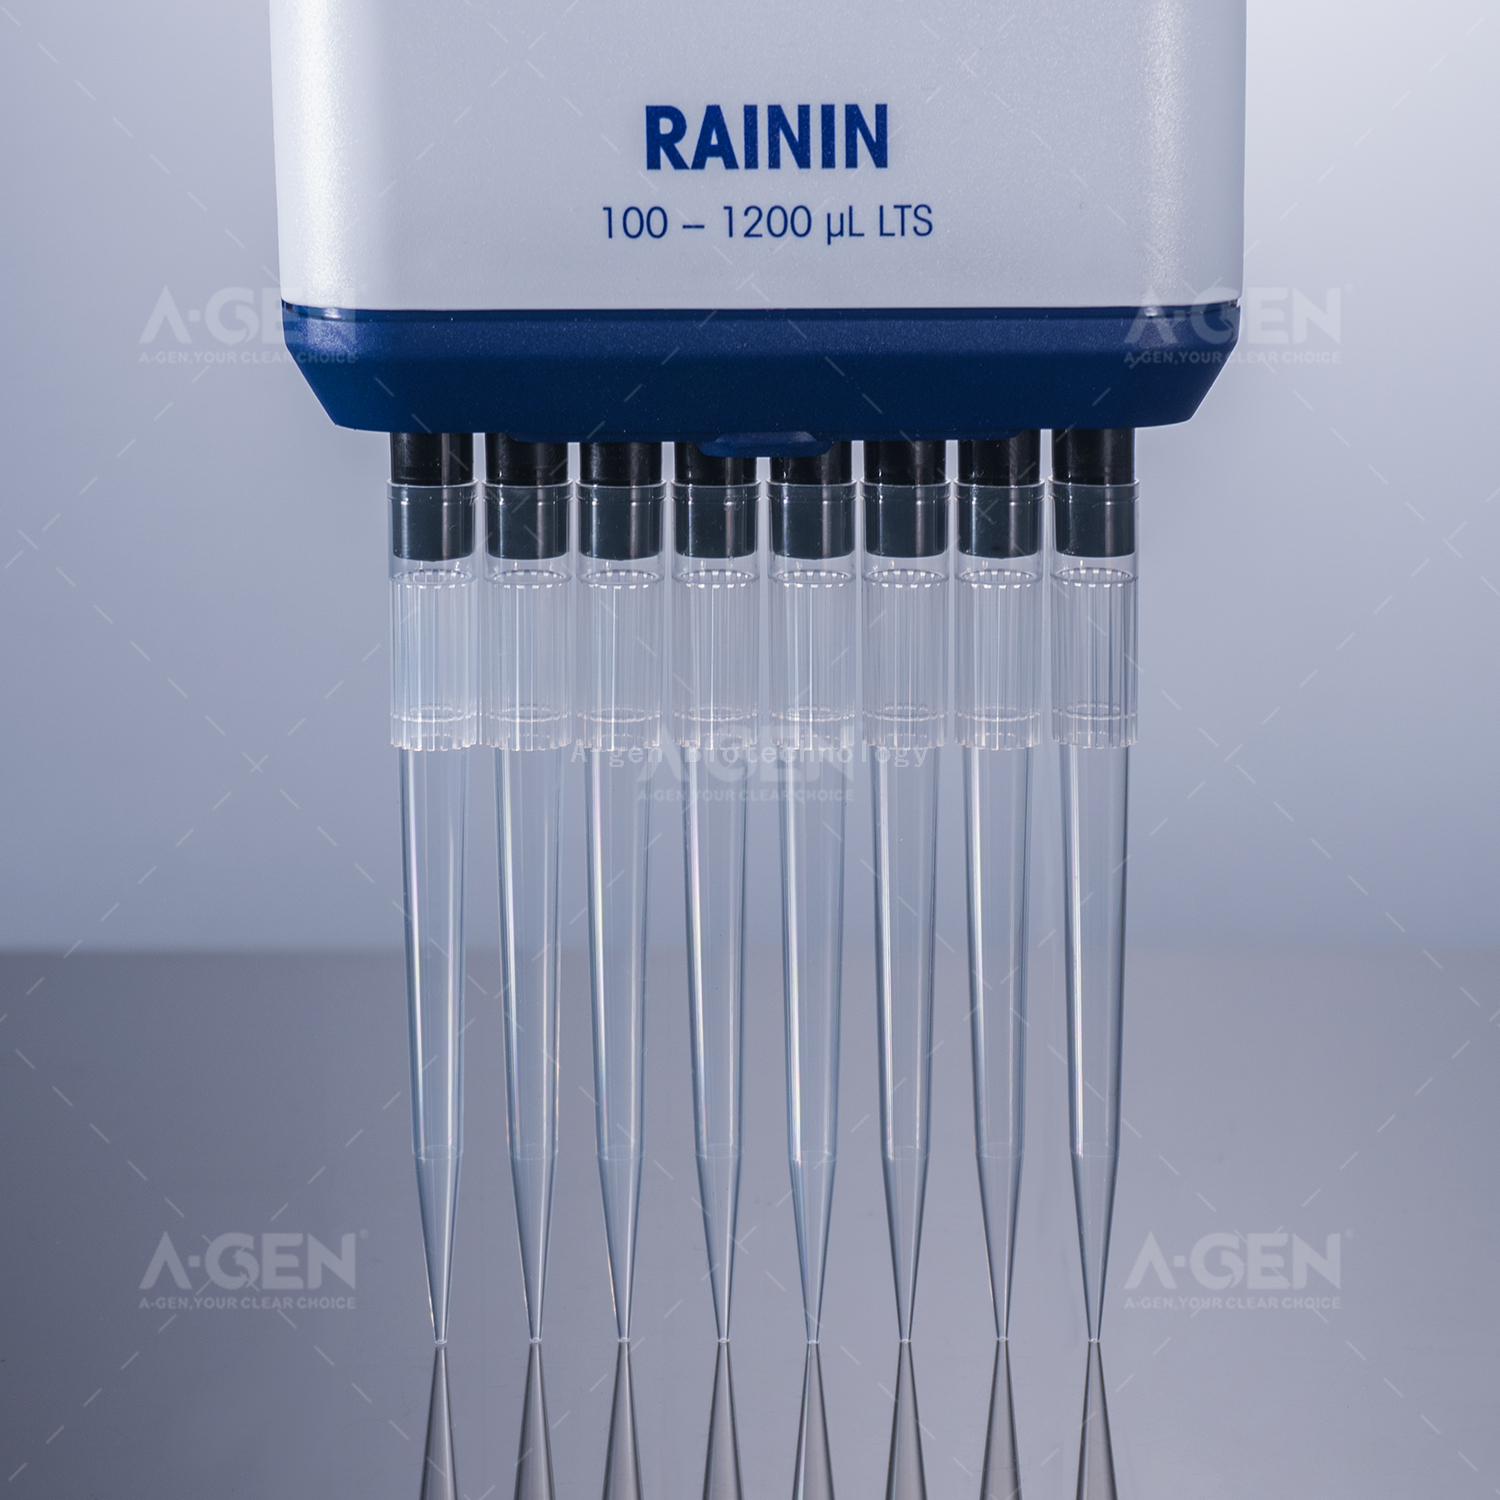 Rainin Low Retention 1000uL Transparent Tips Packed in Bag